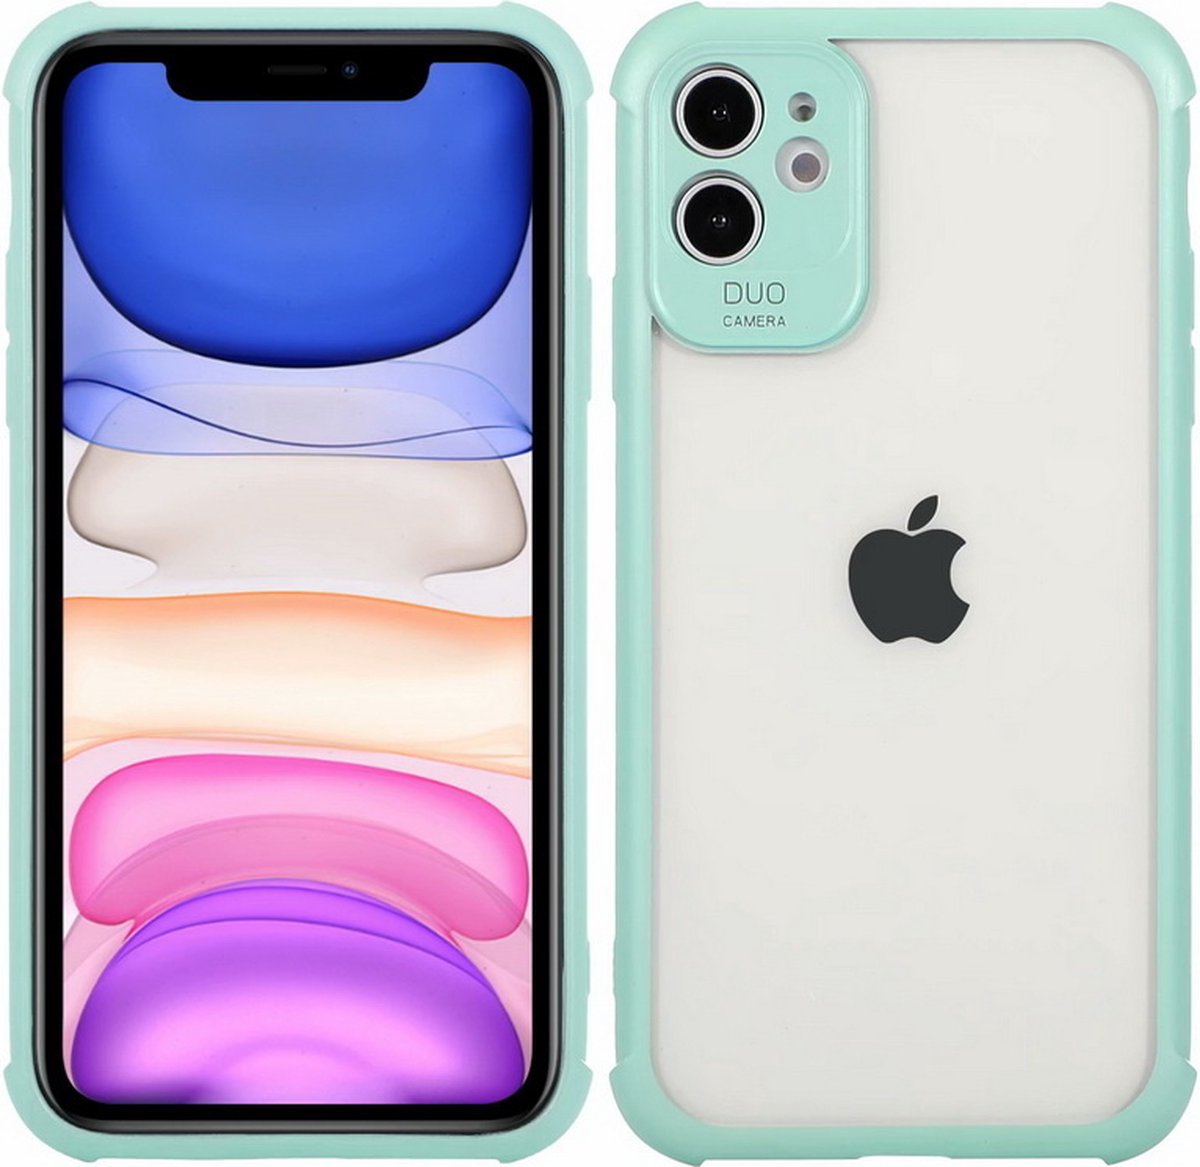 Hoesje geschikt voor Samsung Galaxy A42 - Backcover - Camerabescherming - Anti shock - TPU - Transparant/Turquoise